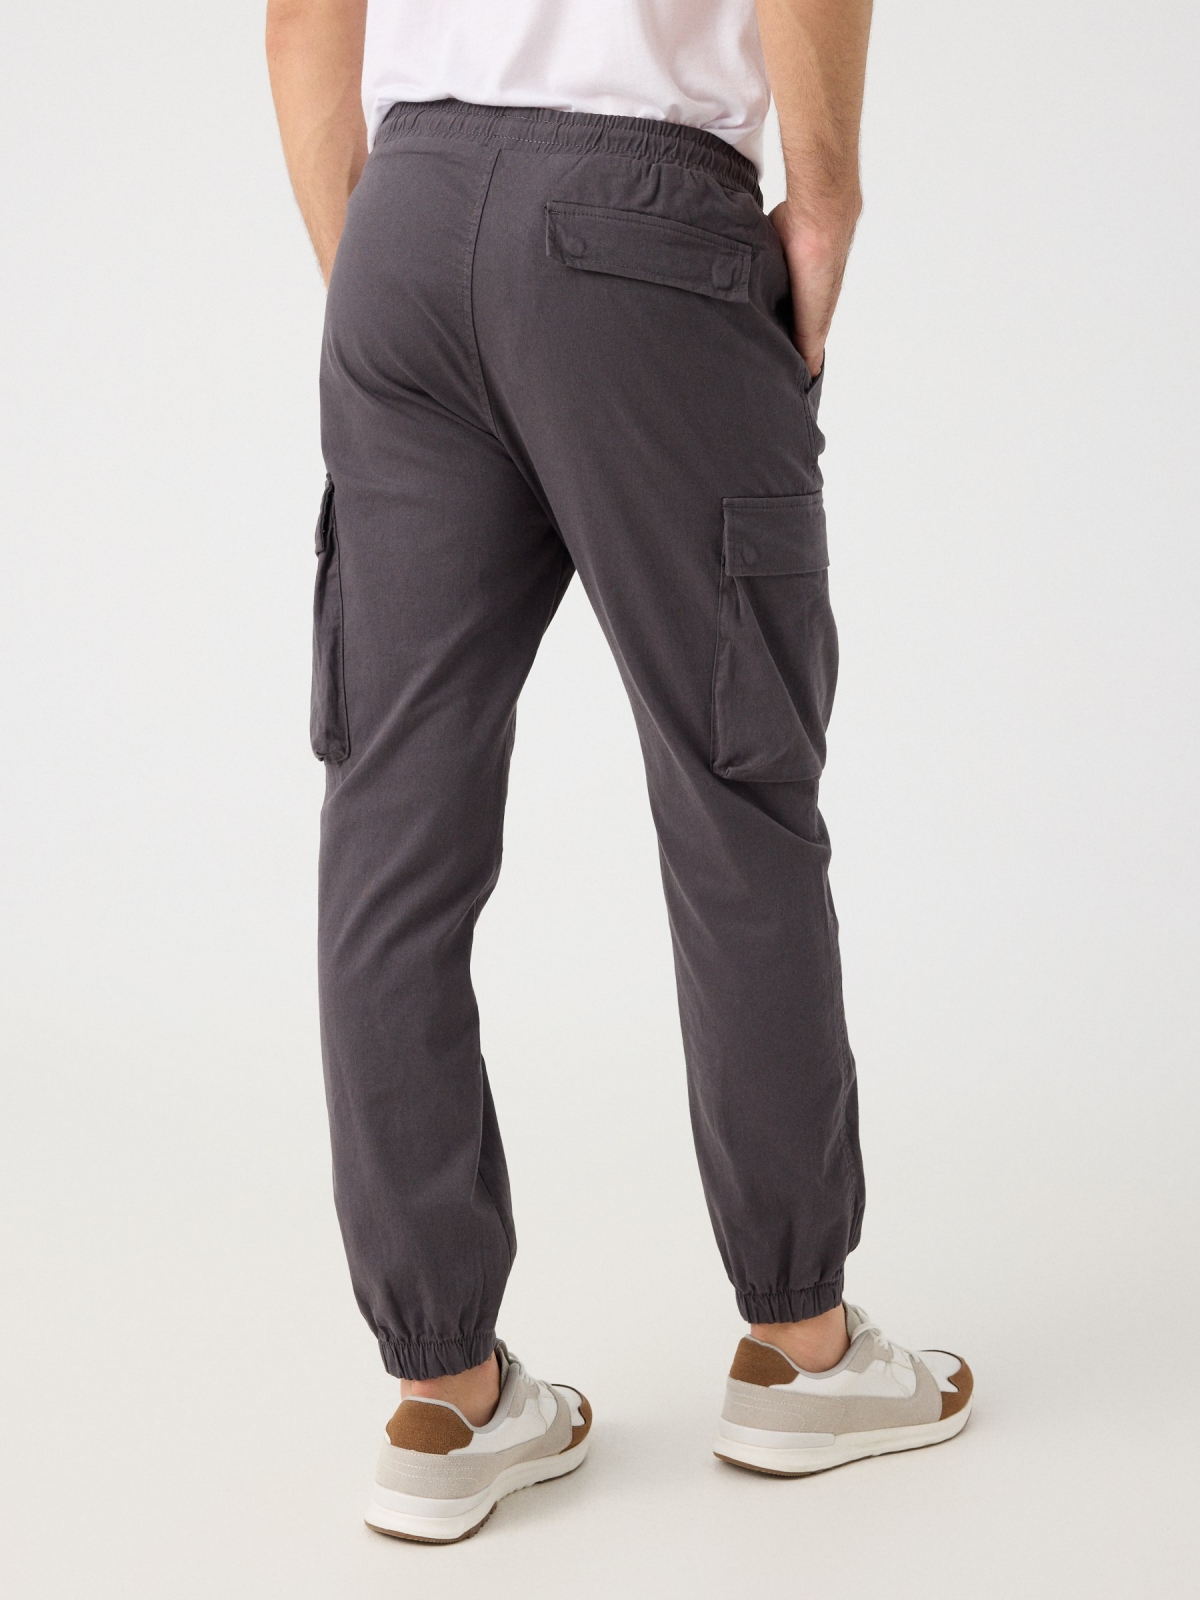 Adjustable cargo joggers grey middle back view